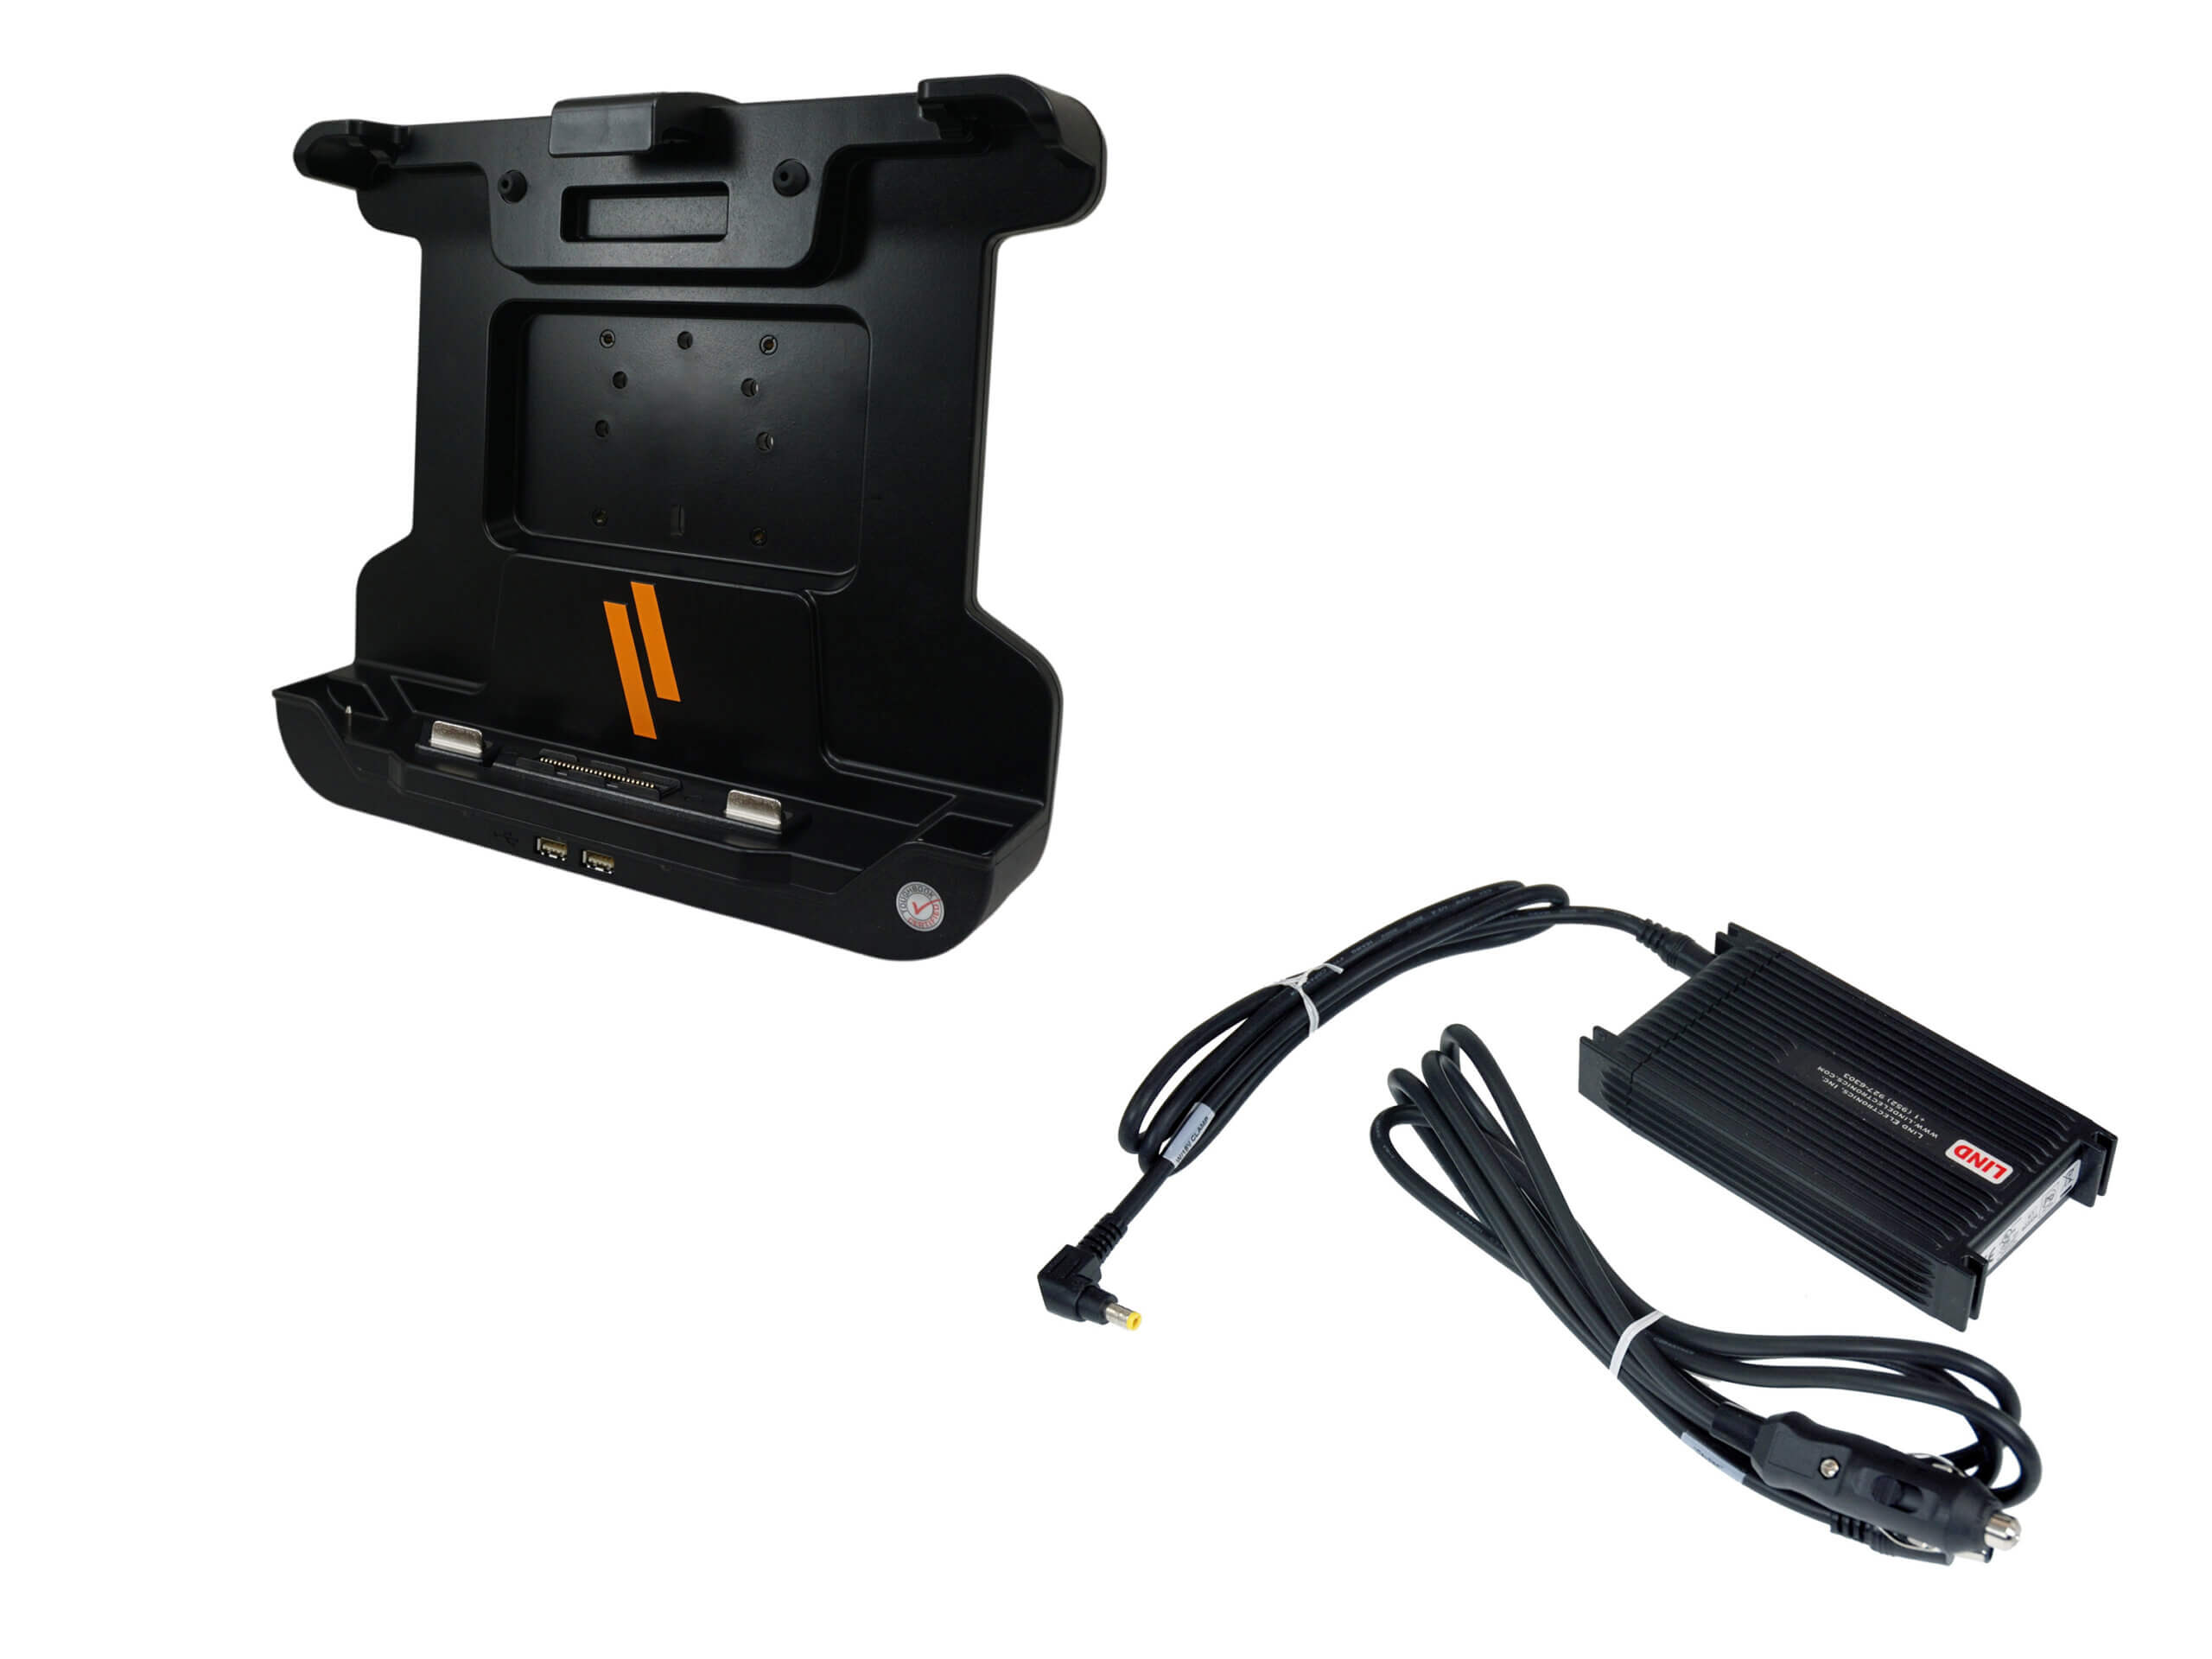 Docking Station For Panasonic TOUGHBOOK 33 Tablet with Advanced Port Replication & LIND Power Supply